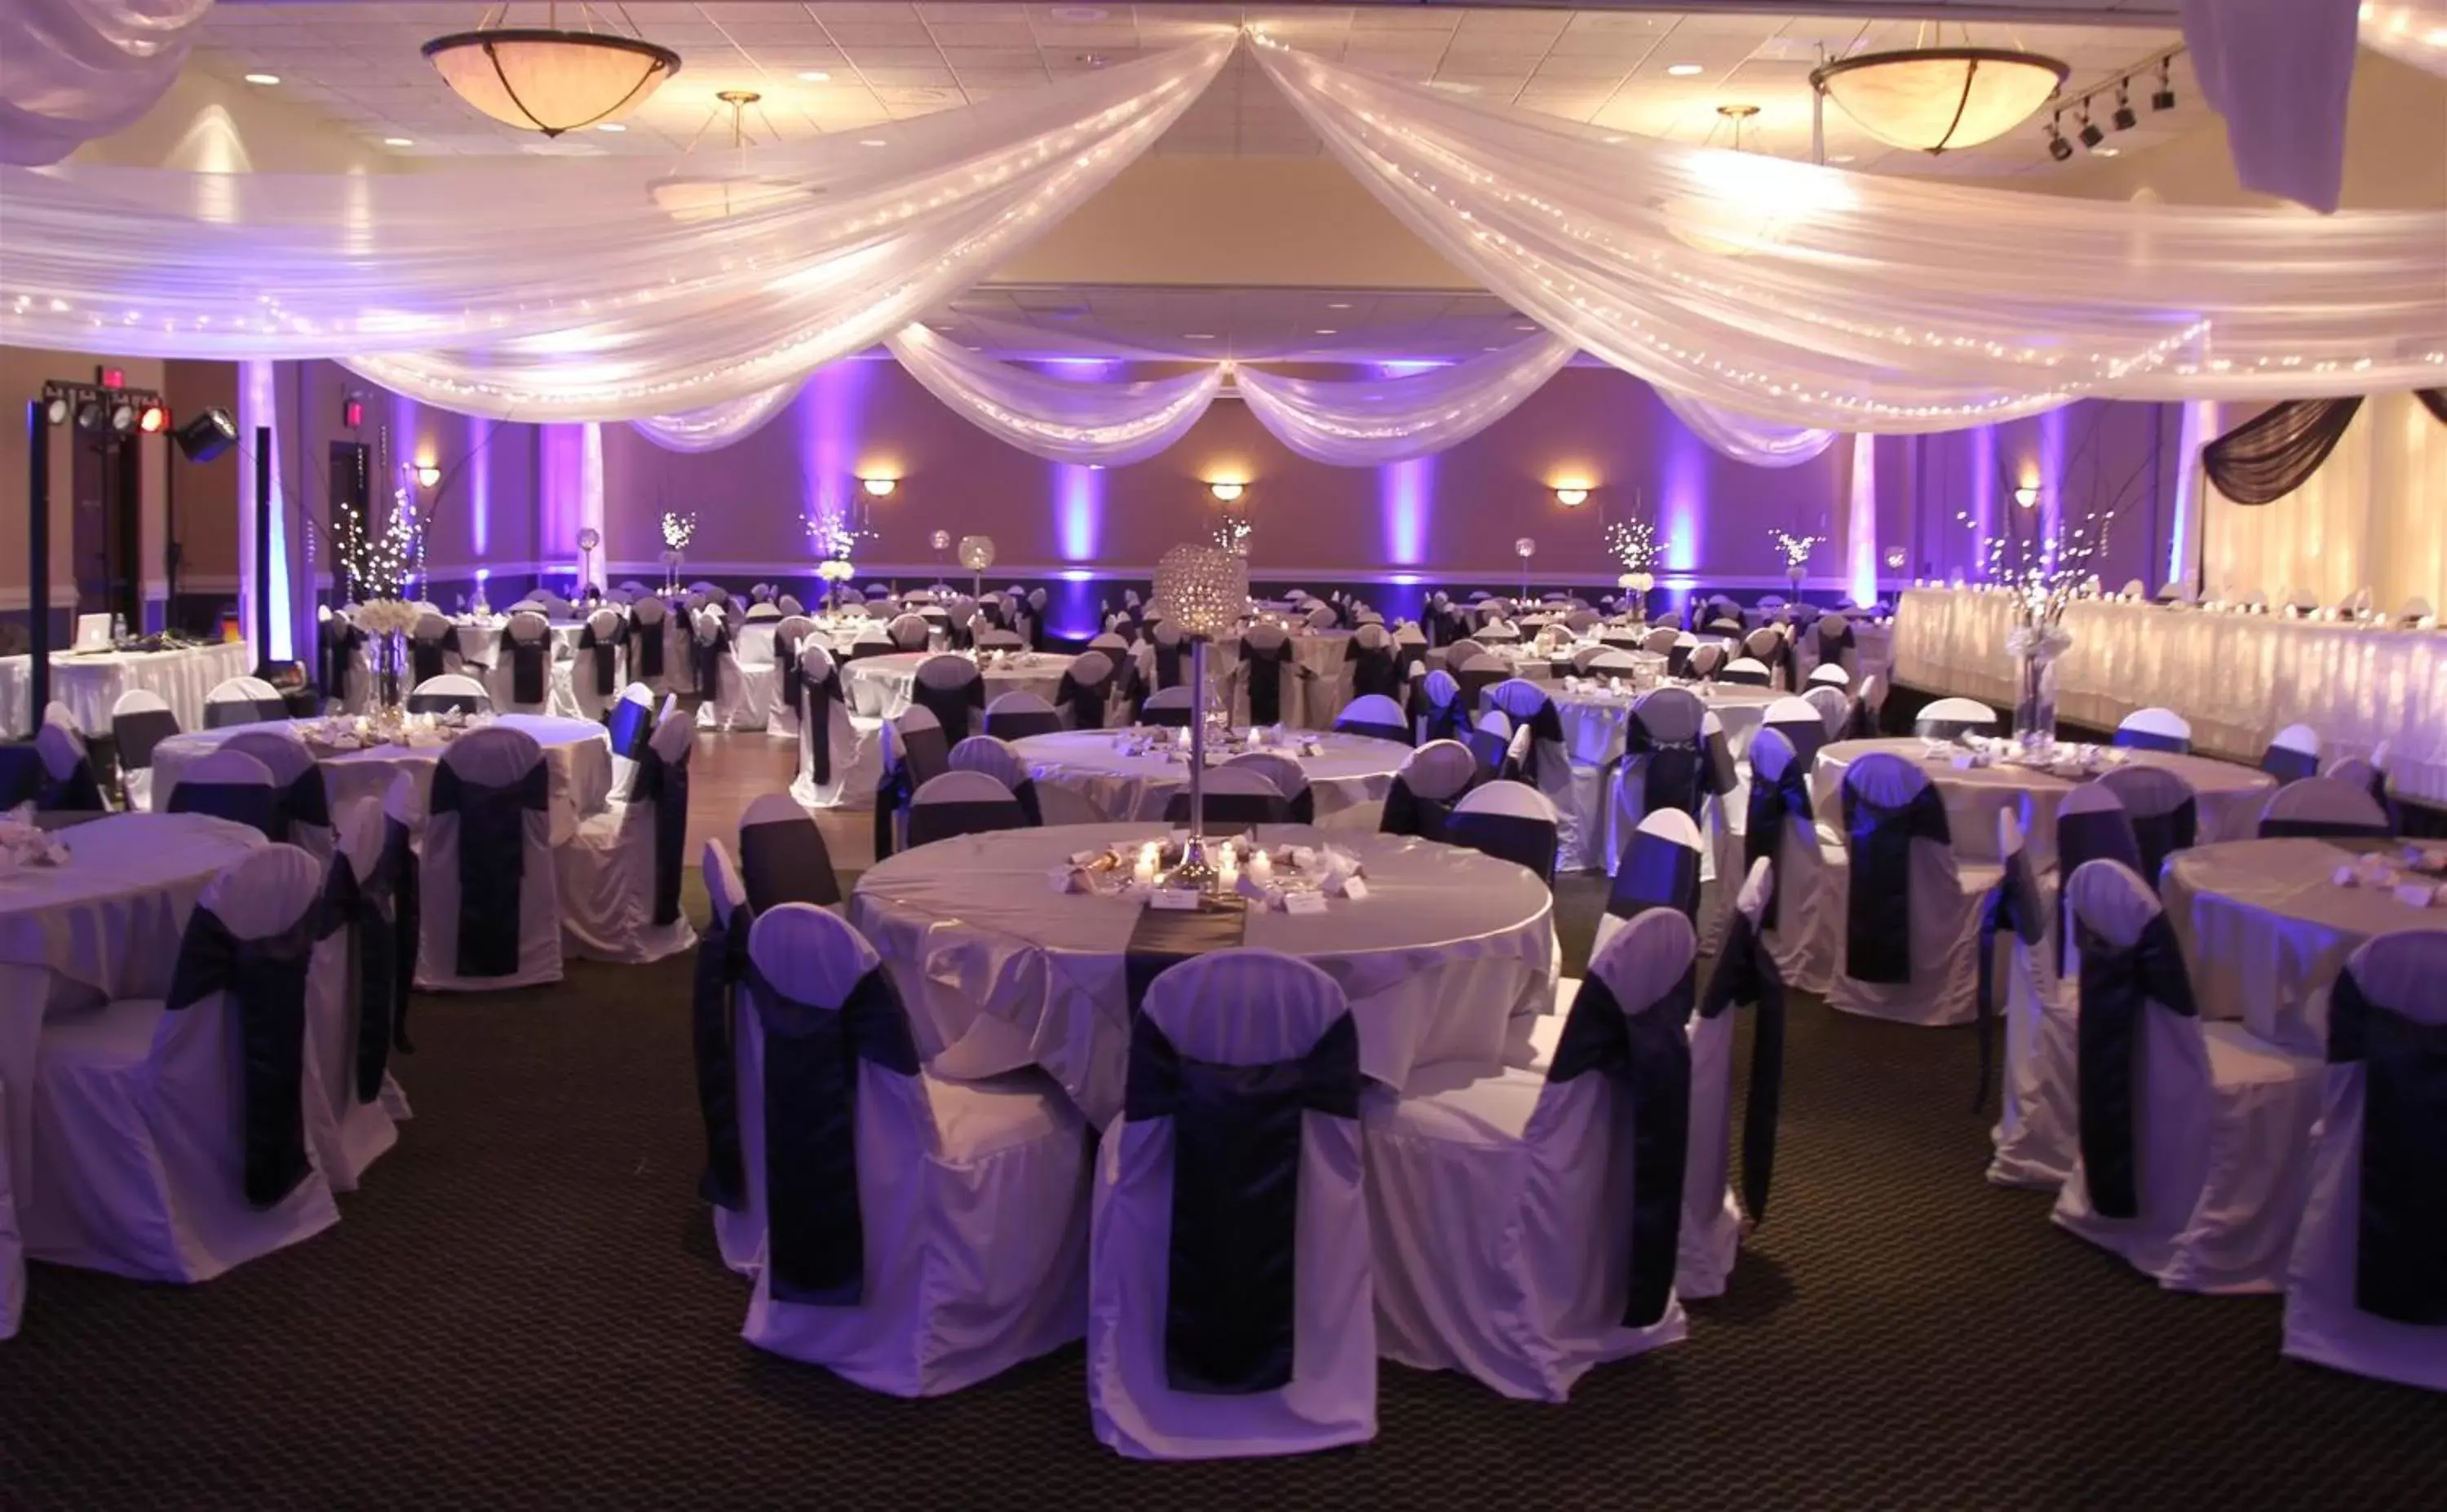 Banquet/Function facilities, Banquet Facilities in Best Western Plus Kelly Inn